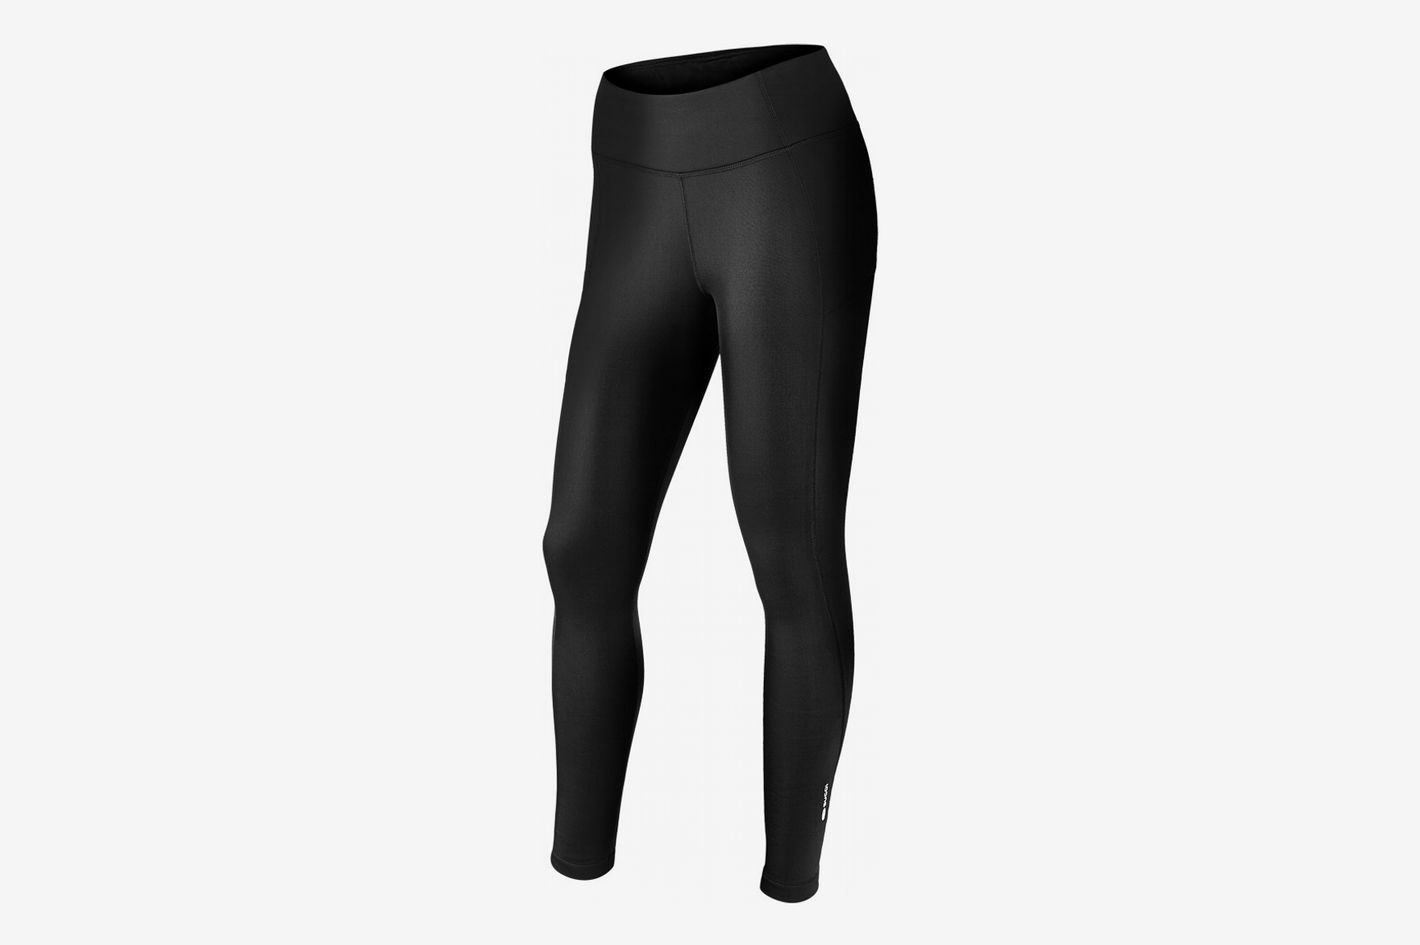 Tracksmith Allston Tights, We're Gobbling Up These Amazing Health and  Fitness Products For November